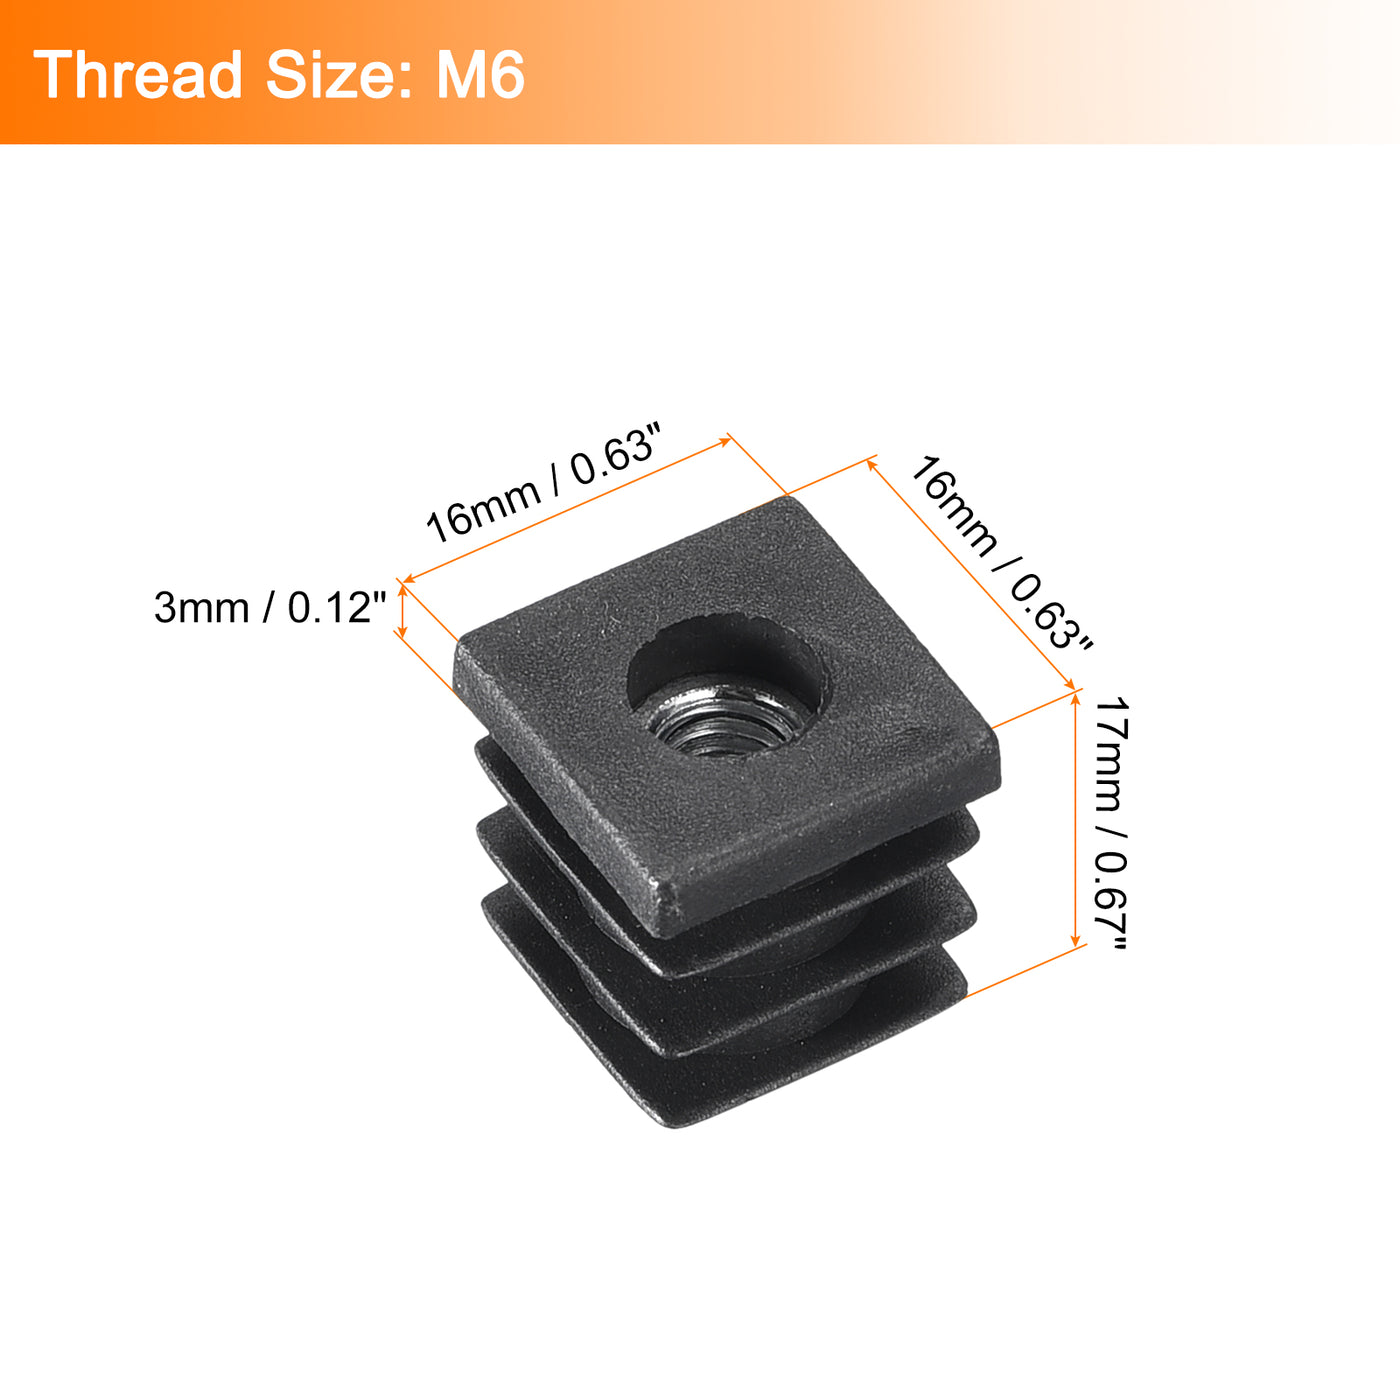 uxcell Uxcell 10Pcs 0.63"x0.63" Caster Insert with Thread, Square M6 Thread for Furniture